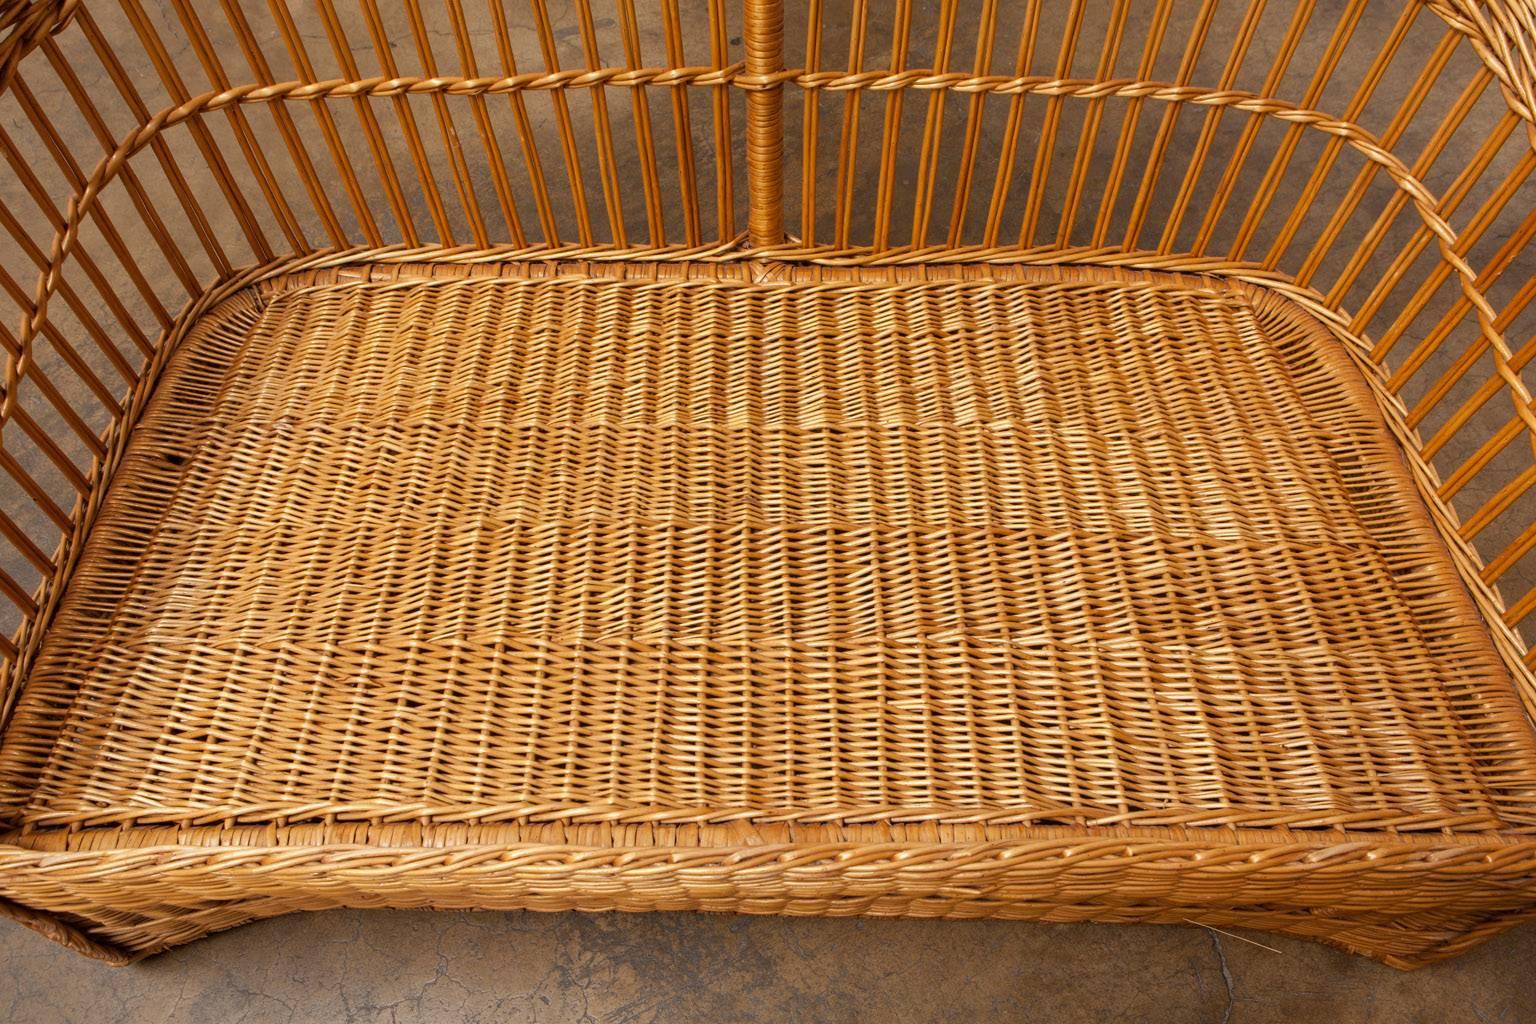 Stylish rattan and stick wicker settee by McGuire featuring a round barrel back shape. The wicker covered frames have braided arms and decorative windows in the base. Well made by famous rattan furniture maker McGuire, San Francisco. This sofa